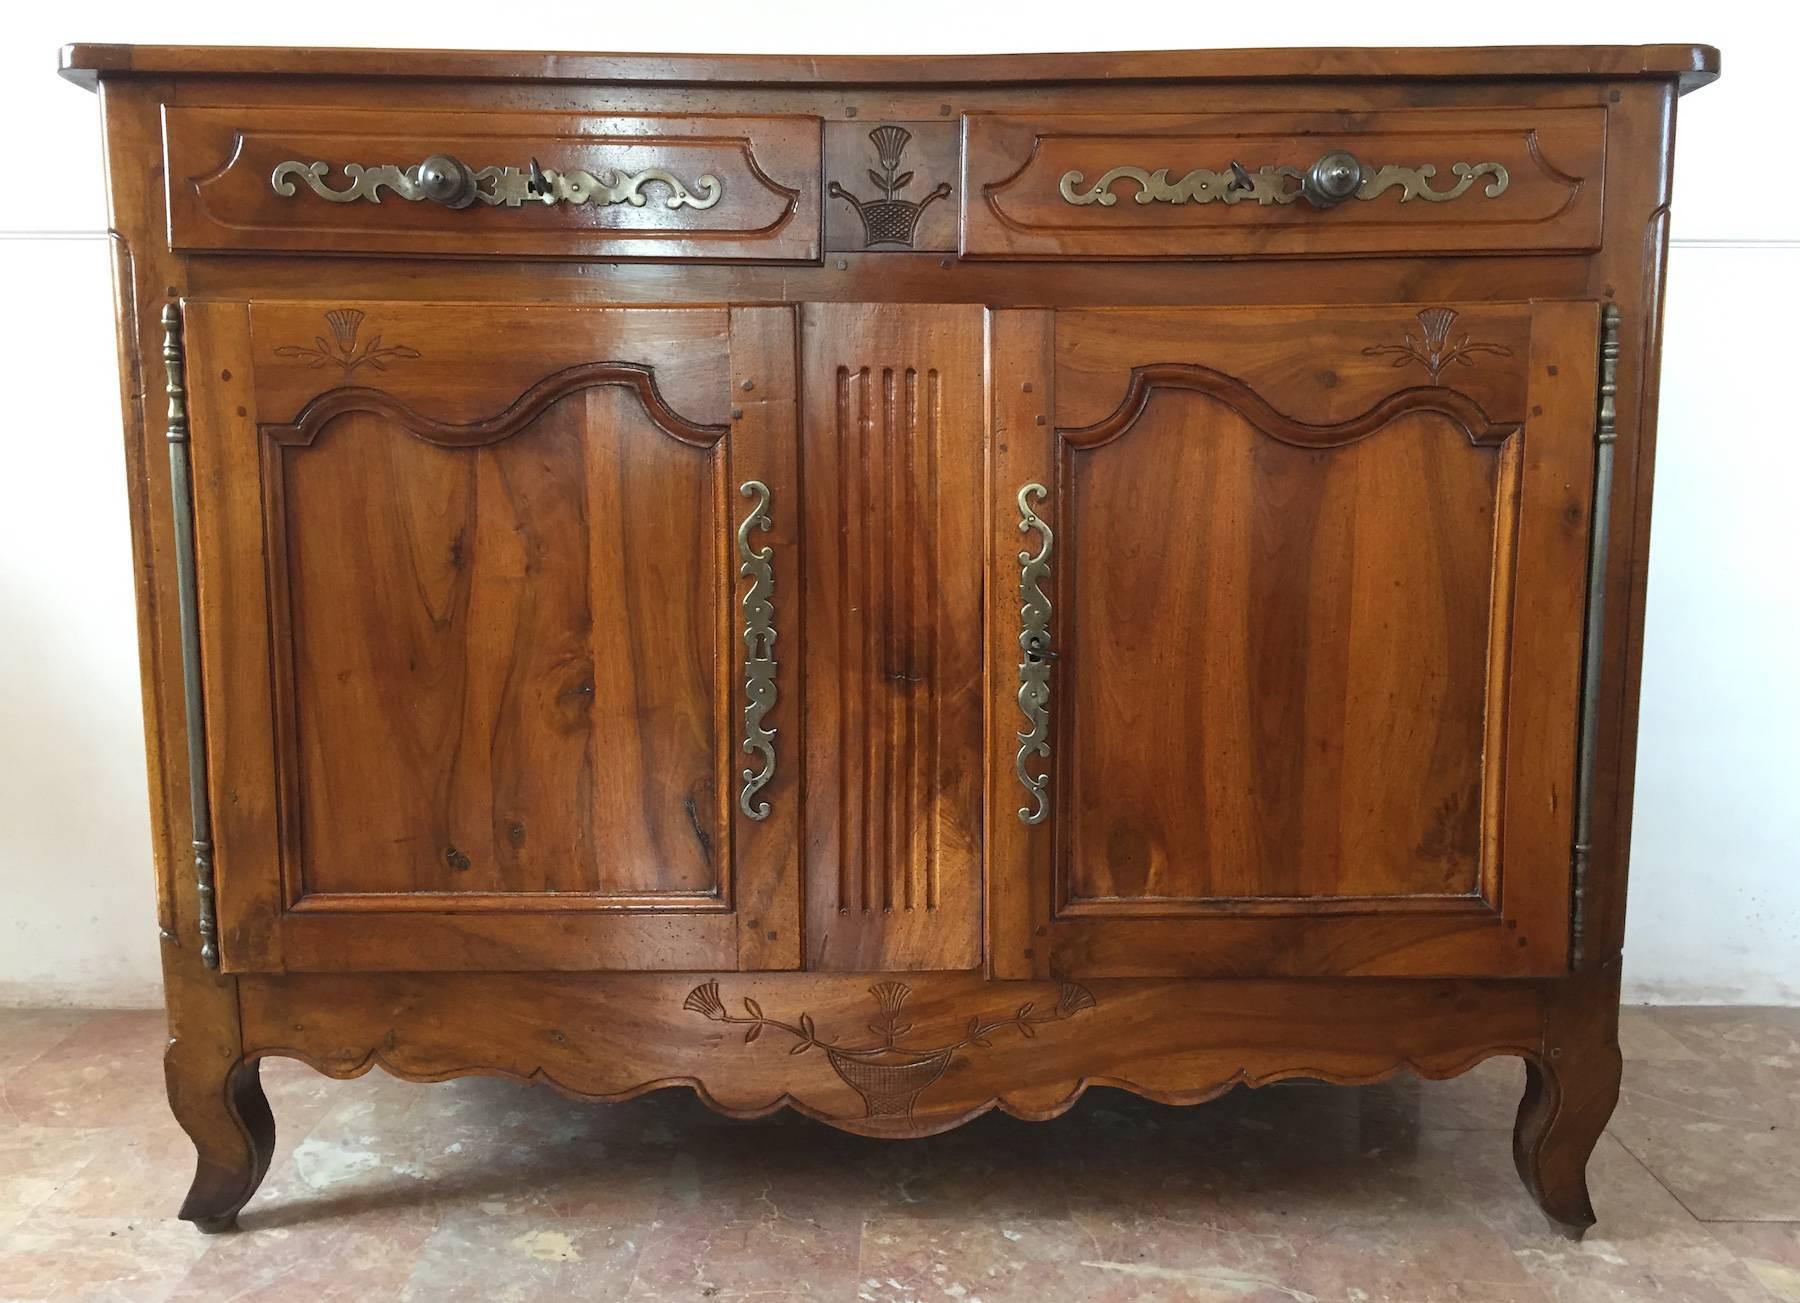 Beautiful sideboard from Provence in walnut, dated beginning of the 1800s, inlays on the doors, splendid original metal decorations.